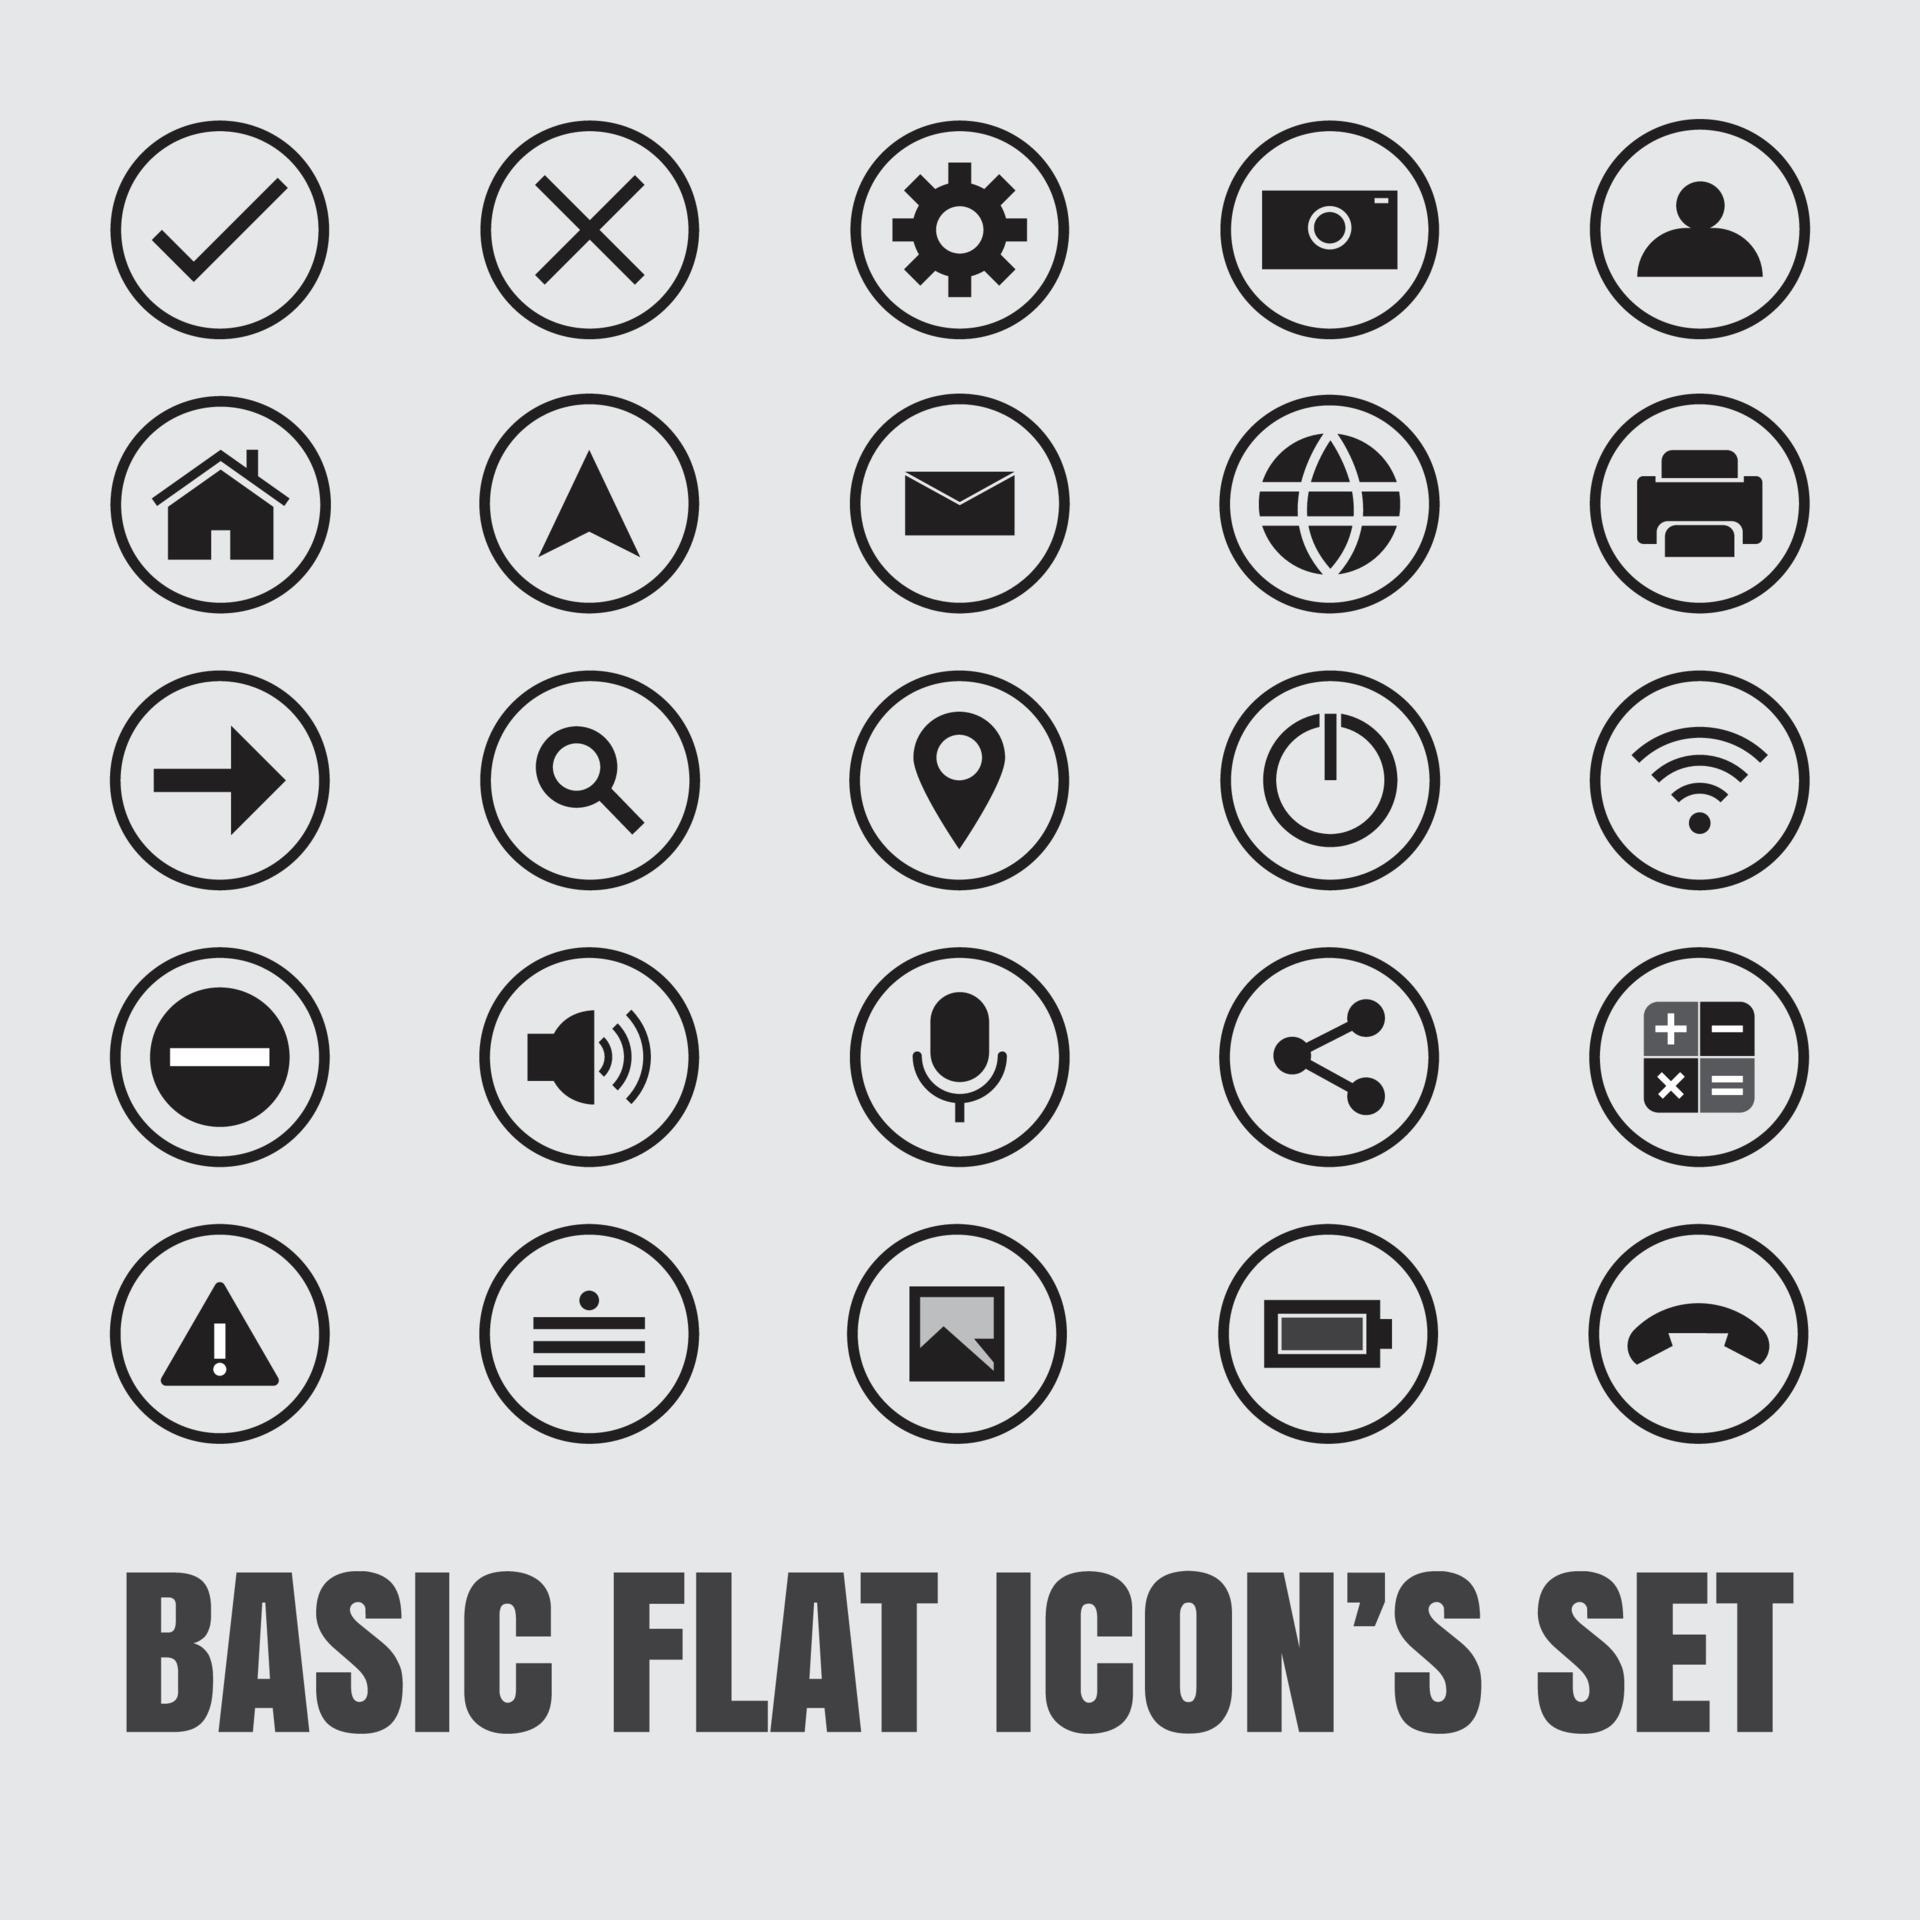 Basic flat icons set. Simplicity meets versatility in our Basic